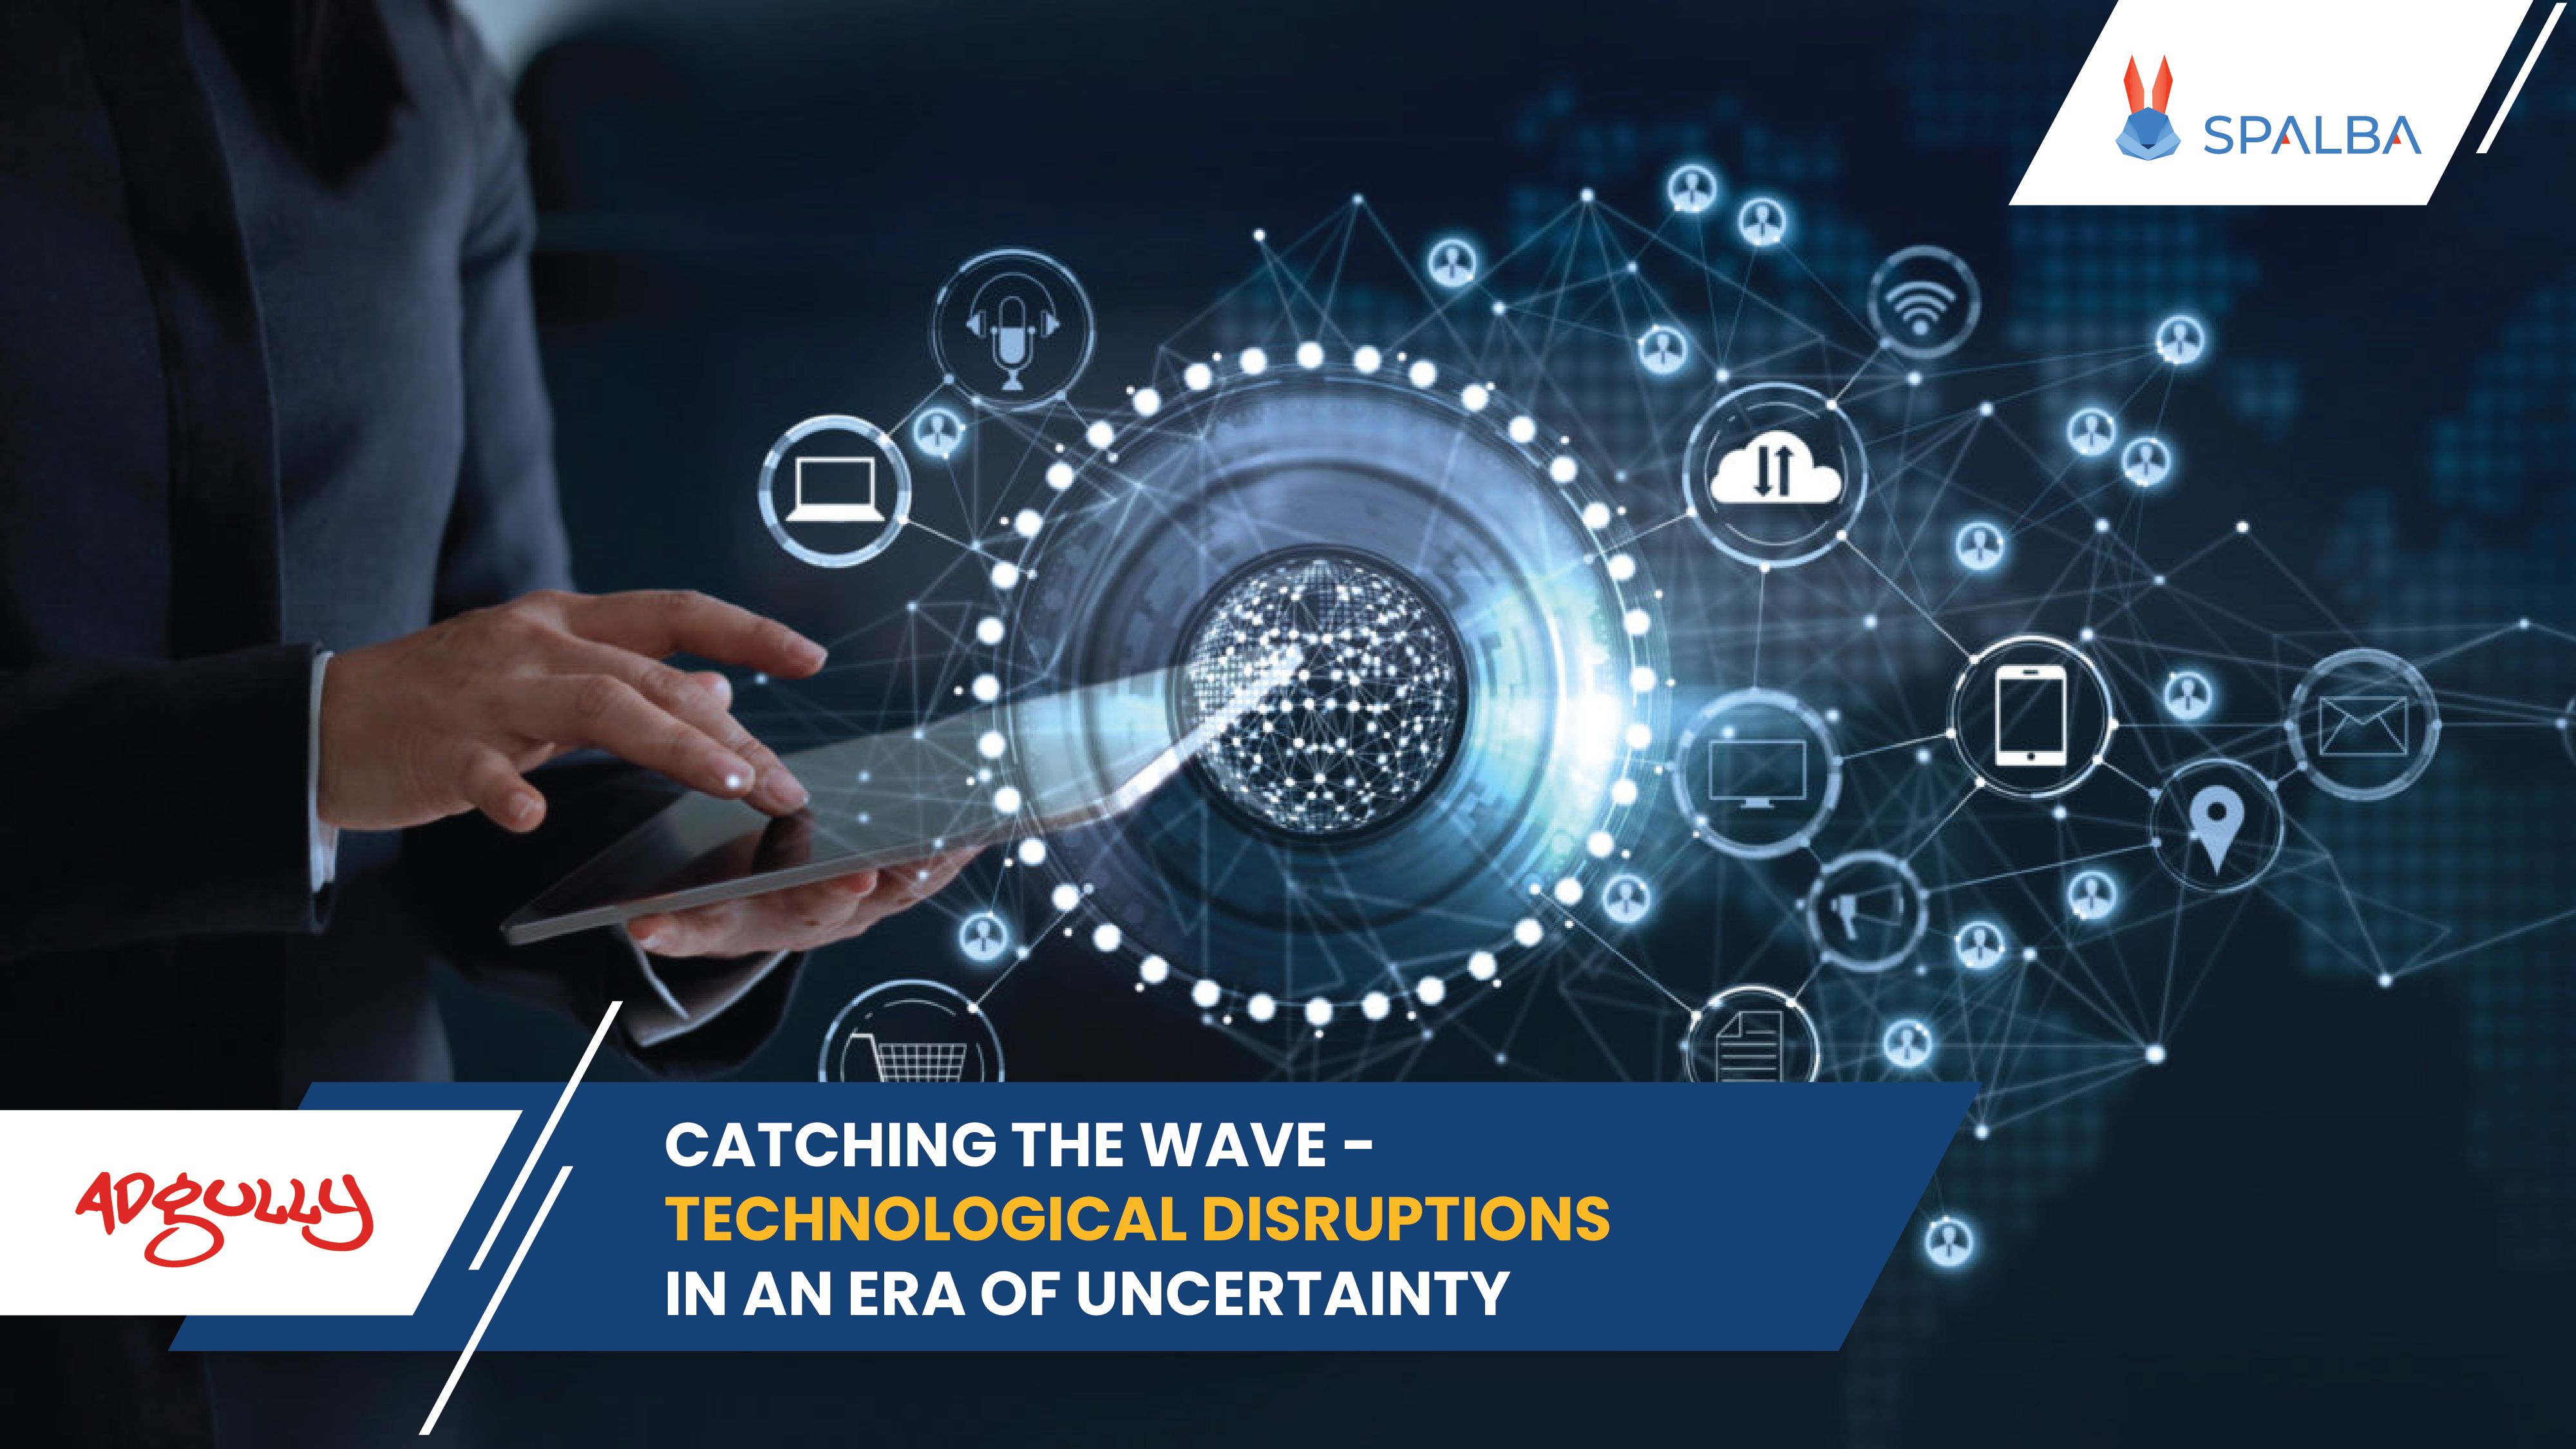 Catching the wave - Technological disruptions for an era of uncertainty